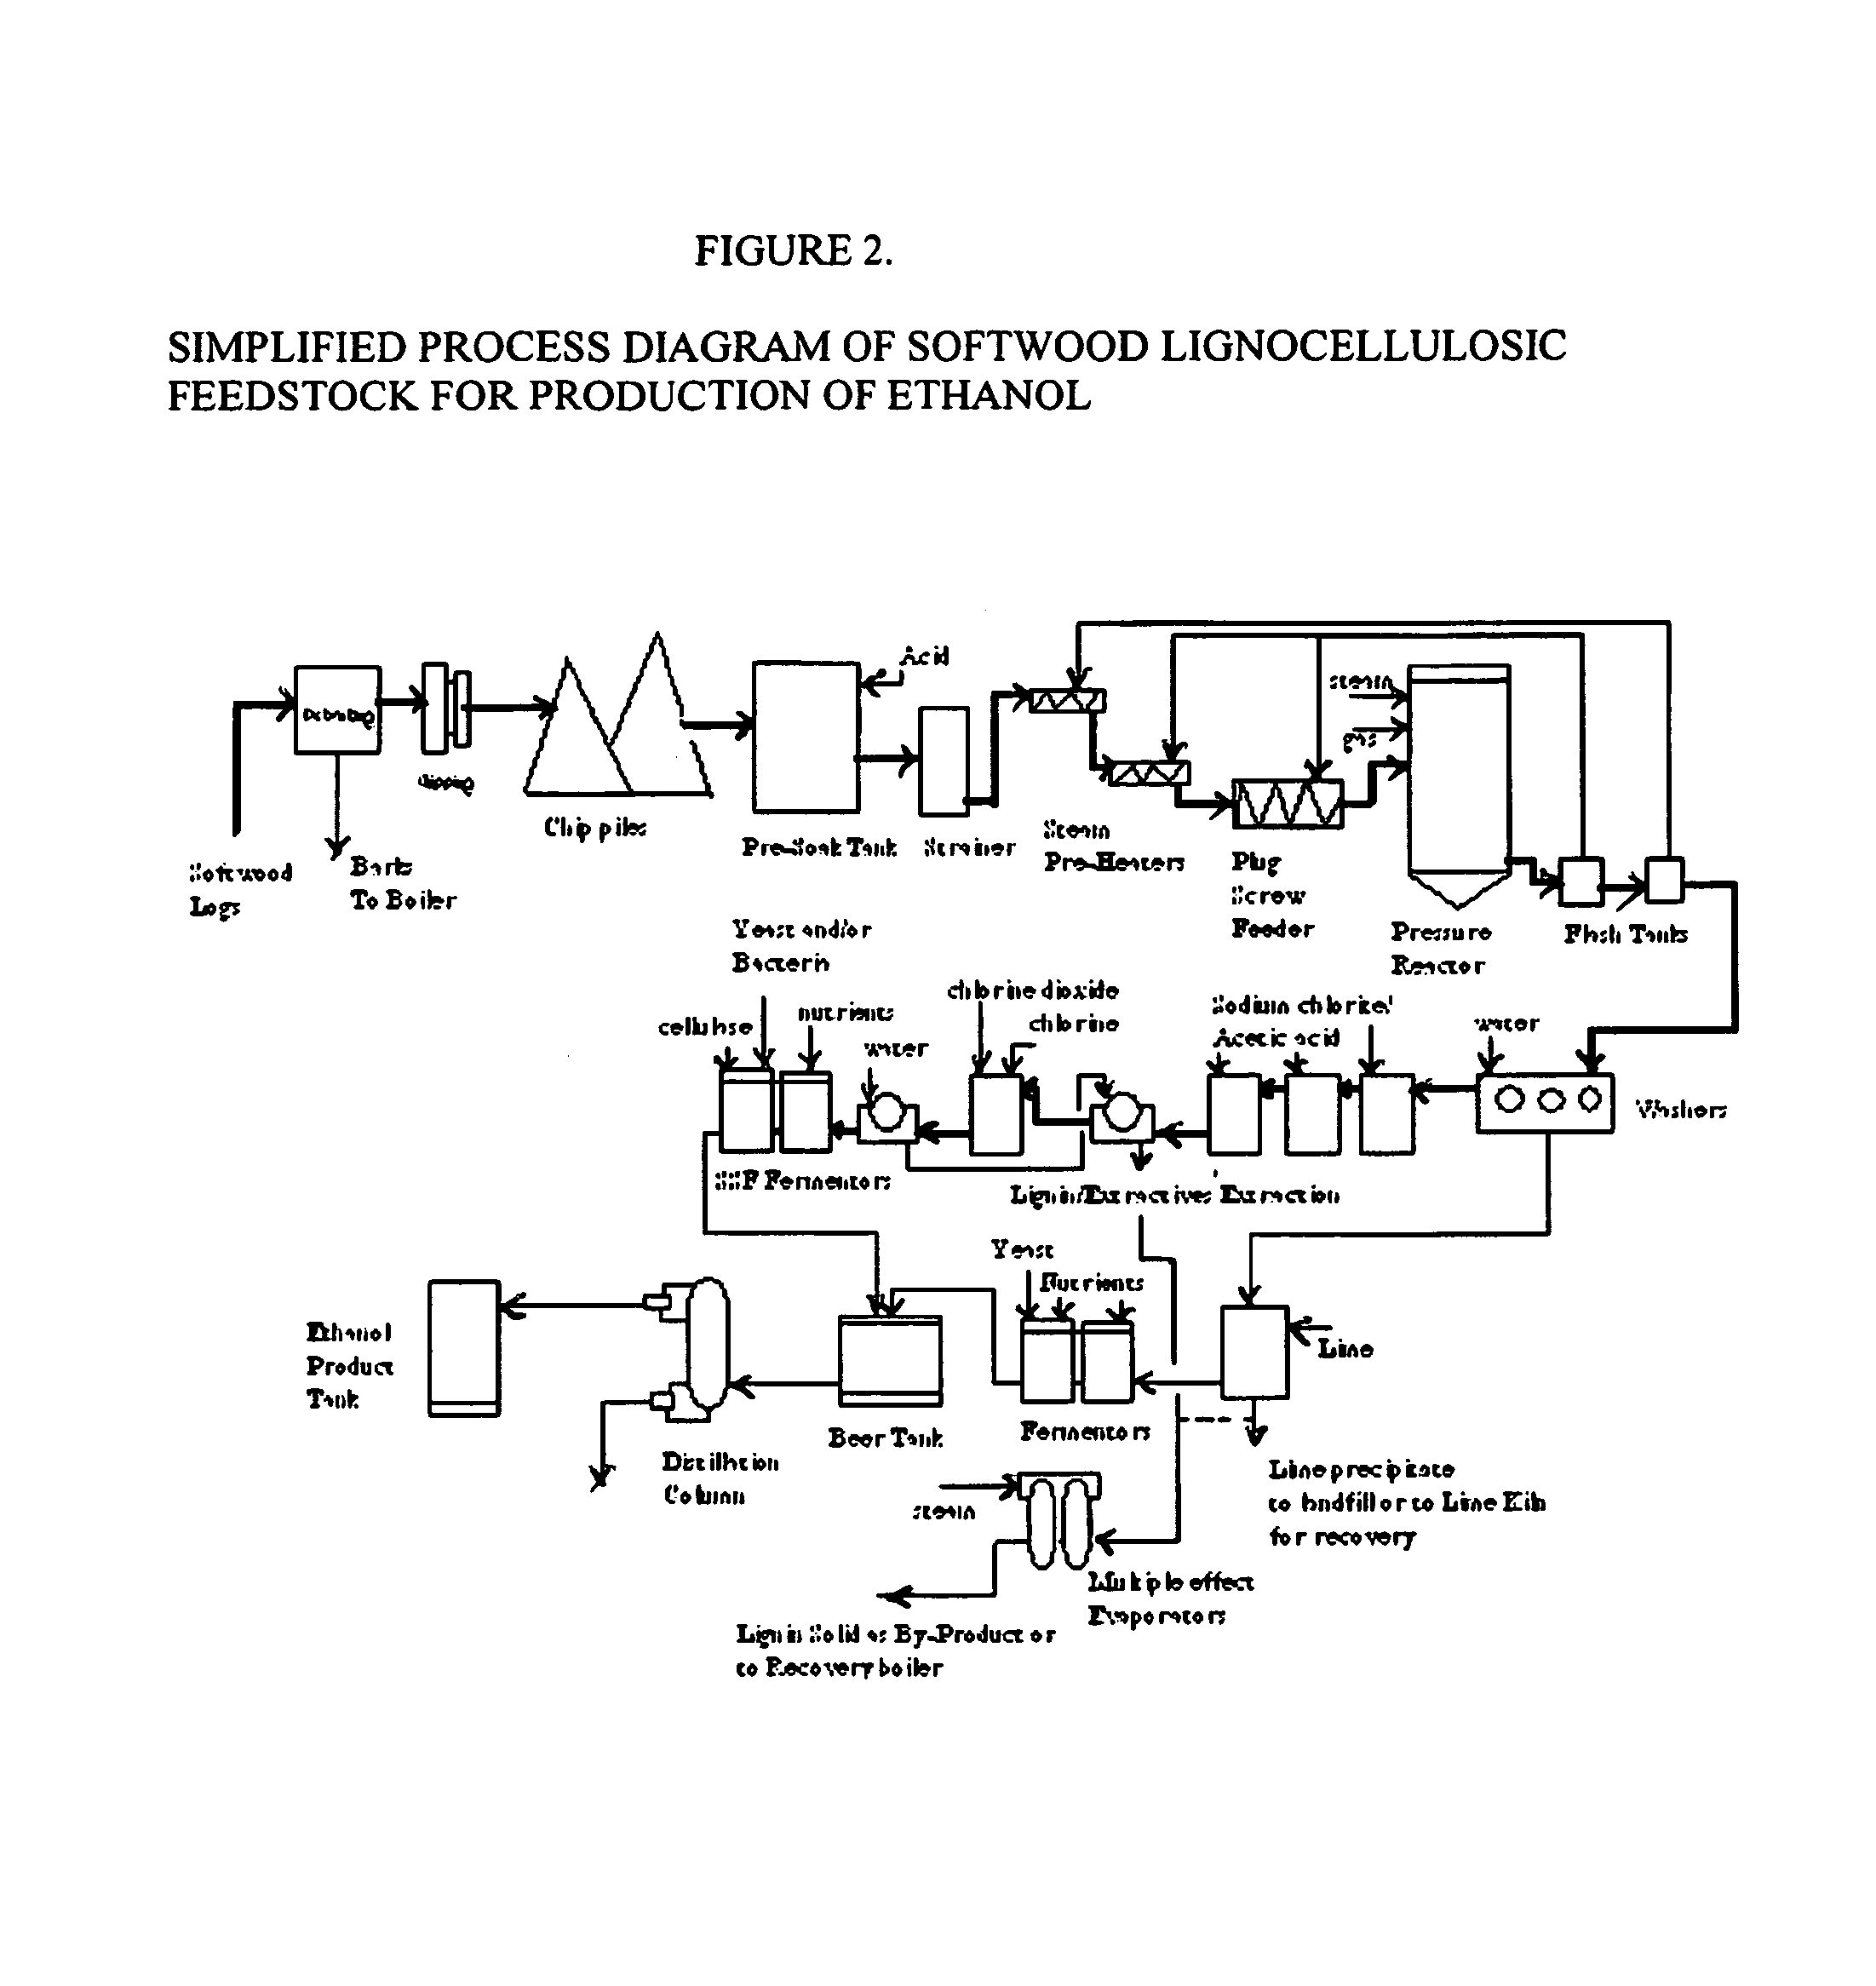 Integrated process for separation of lignocellulosic components to fermentable sugars for production of ethanol and chemicals